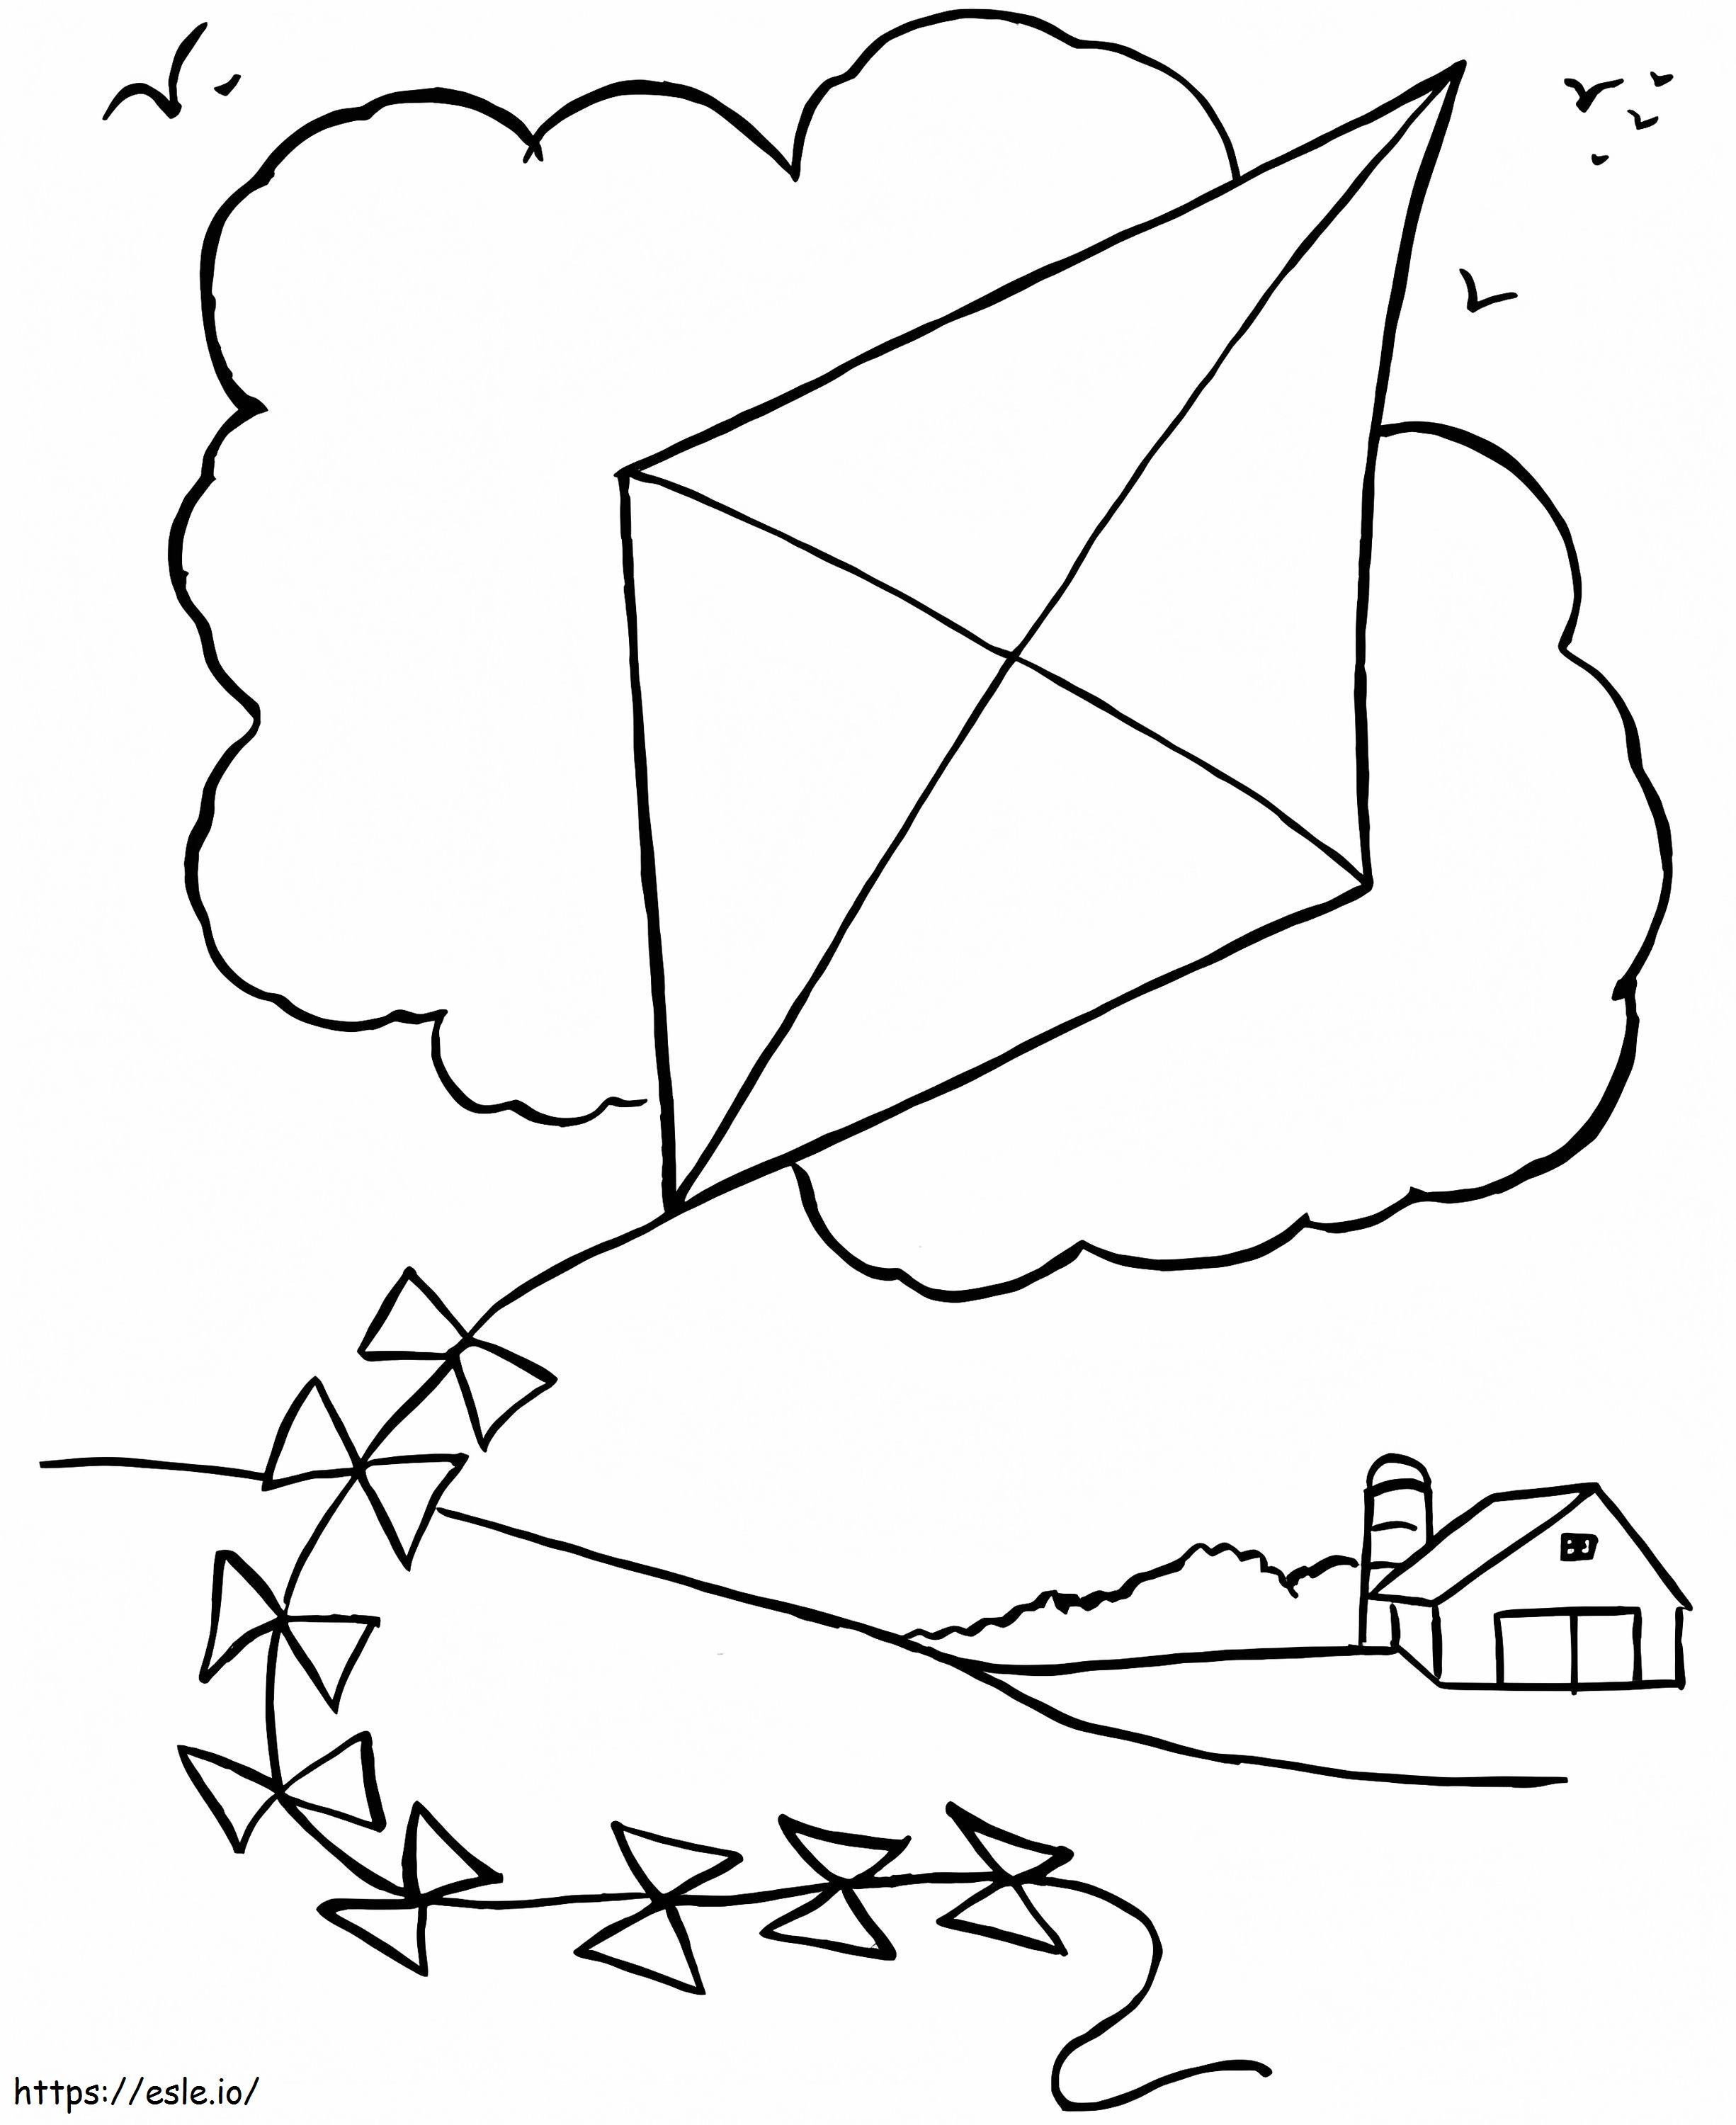 Flying Kite coloring page